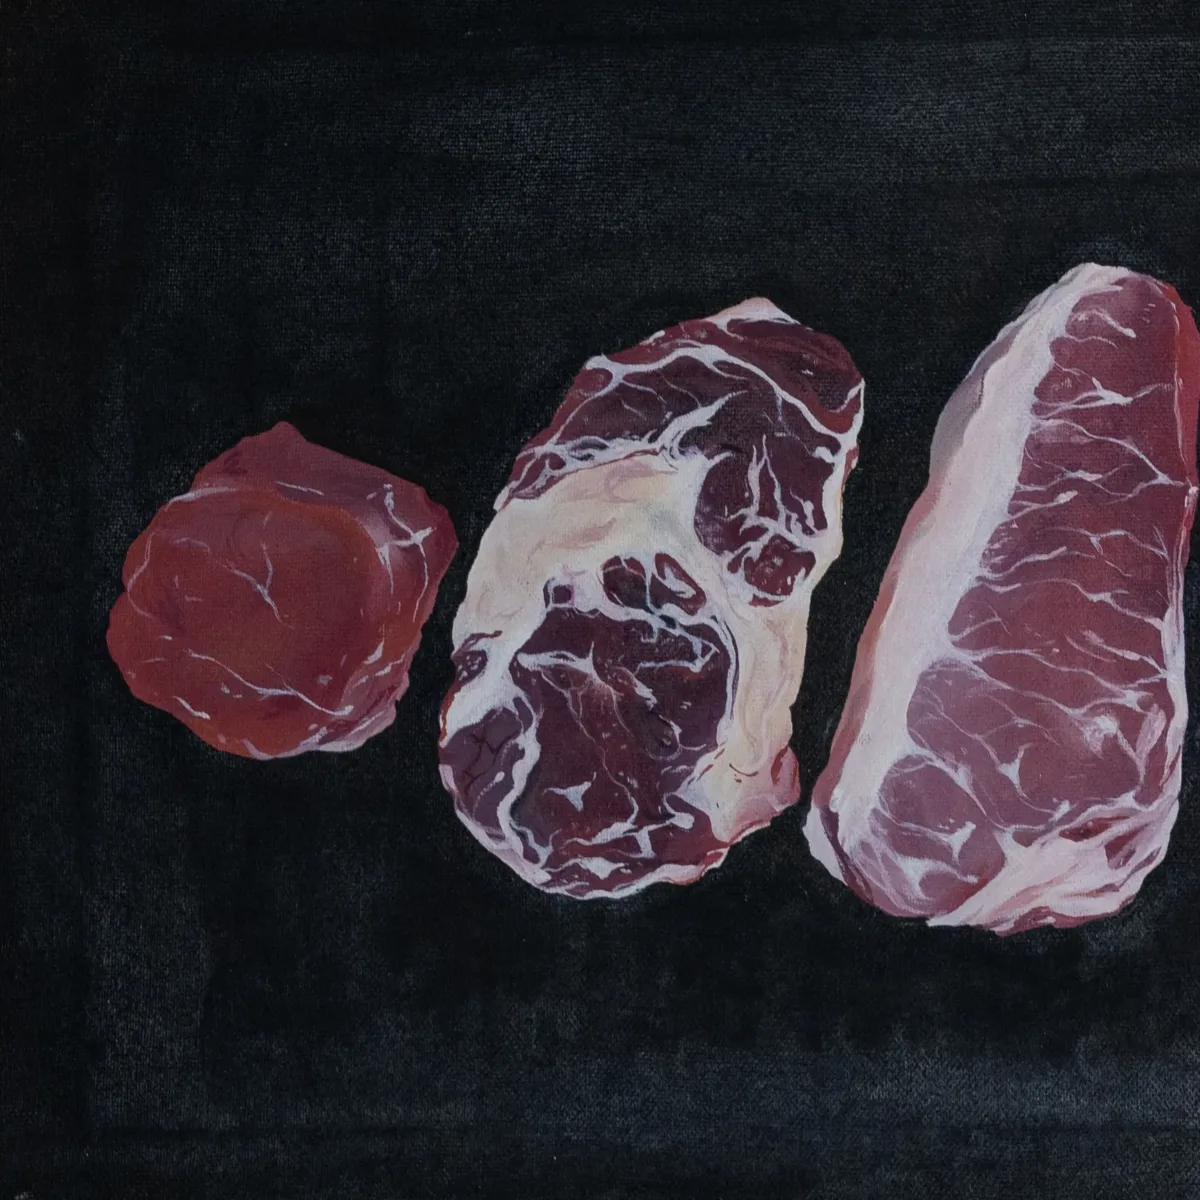 Original painting for sell from contemporary artist. We are what we eat - Masha Bo.